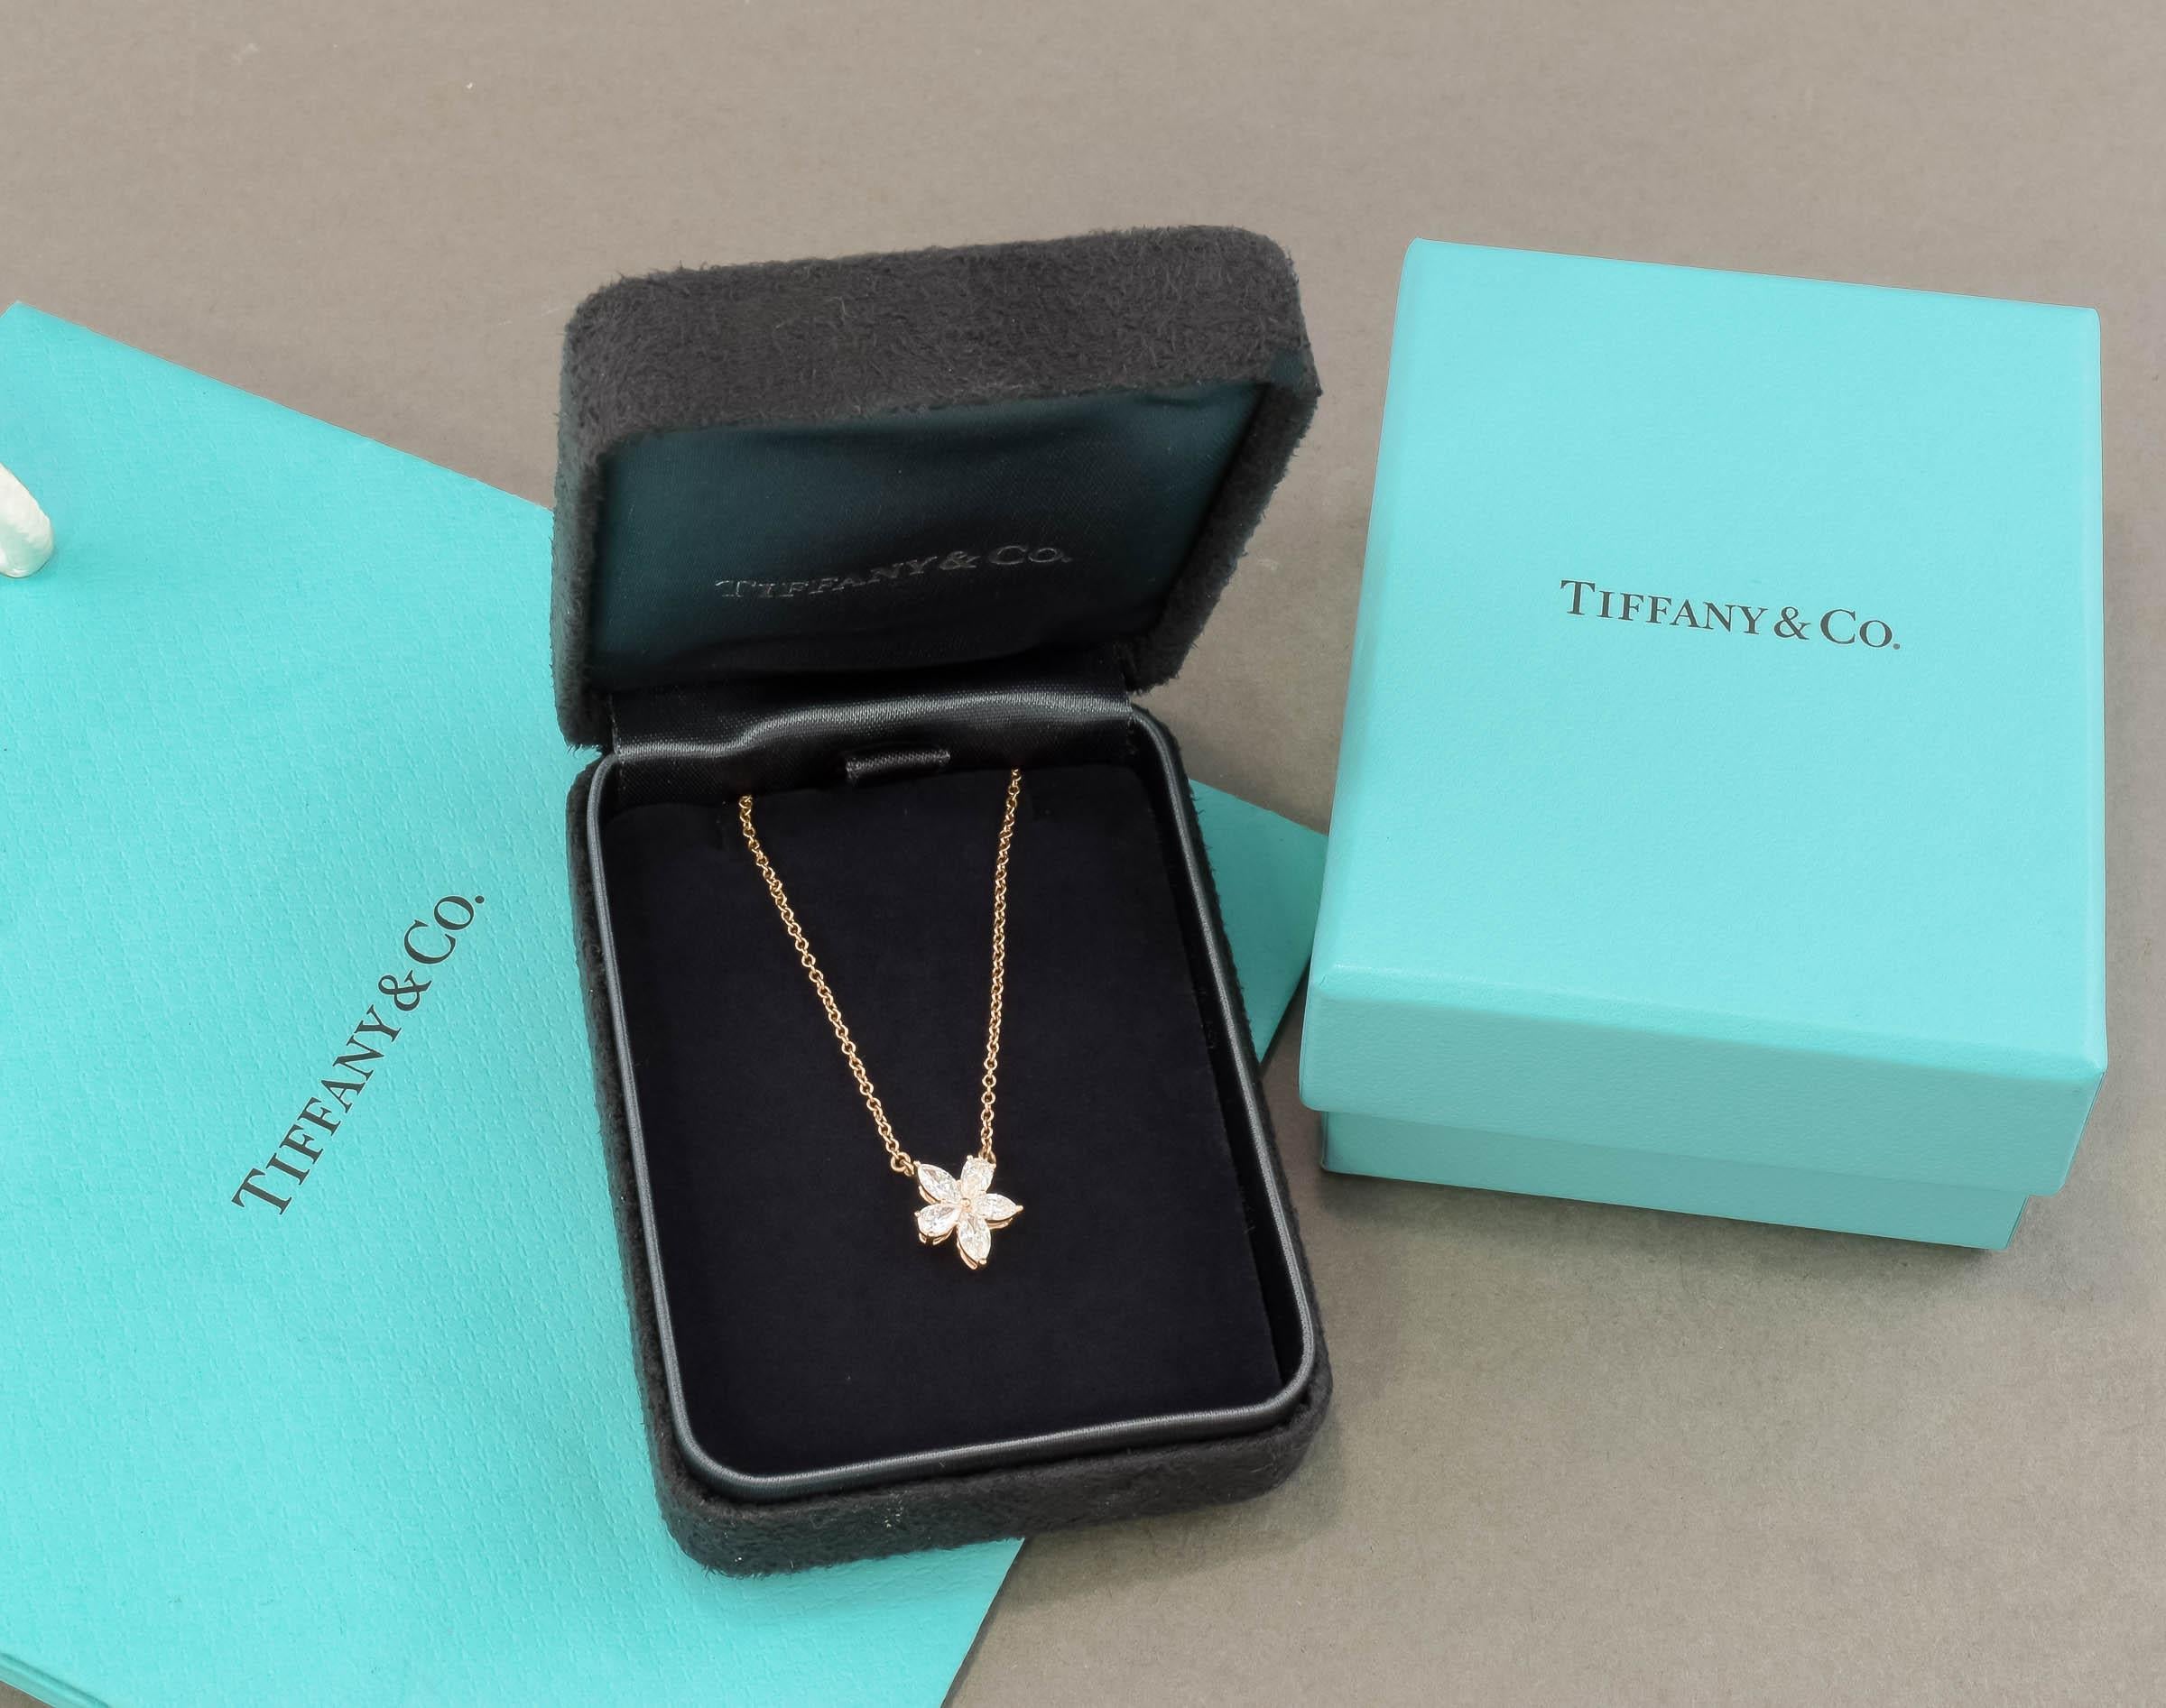 Offered is a very elegant estate Tiffany & Co. diamond necklace from their romantic Victoria collection.  One of the harder to find designs, this is a mixed cluster flower in pear and marquise cut diamonds set in 18K rose gold, with a total